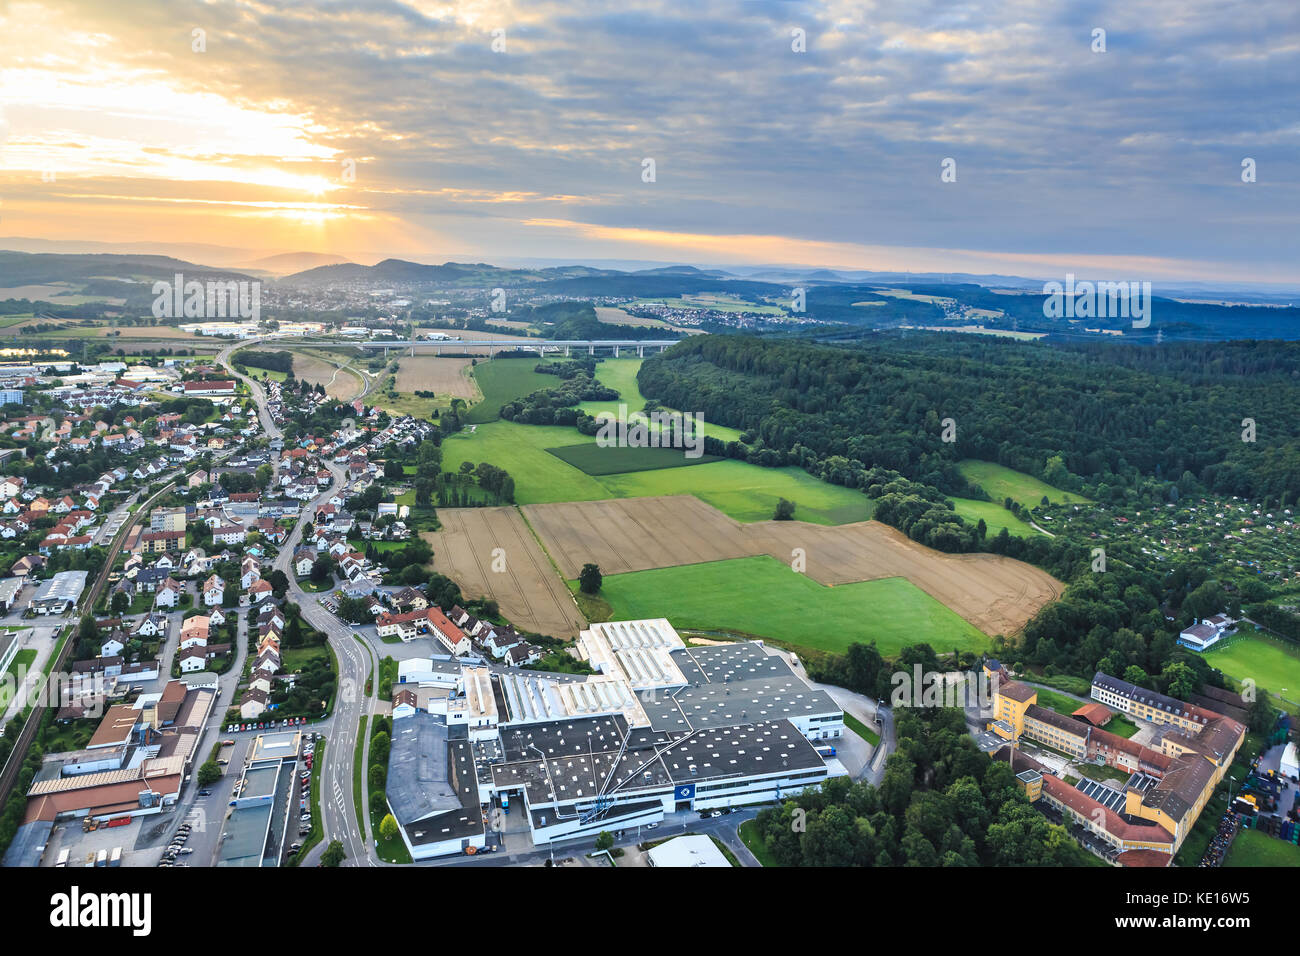 Air view of Coburg town, Bavaria, Germany Stock Photo